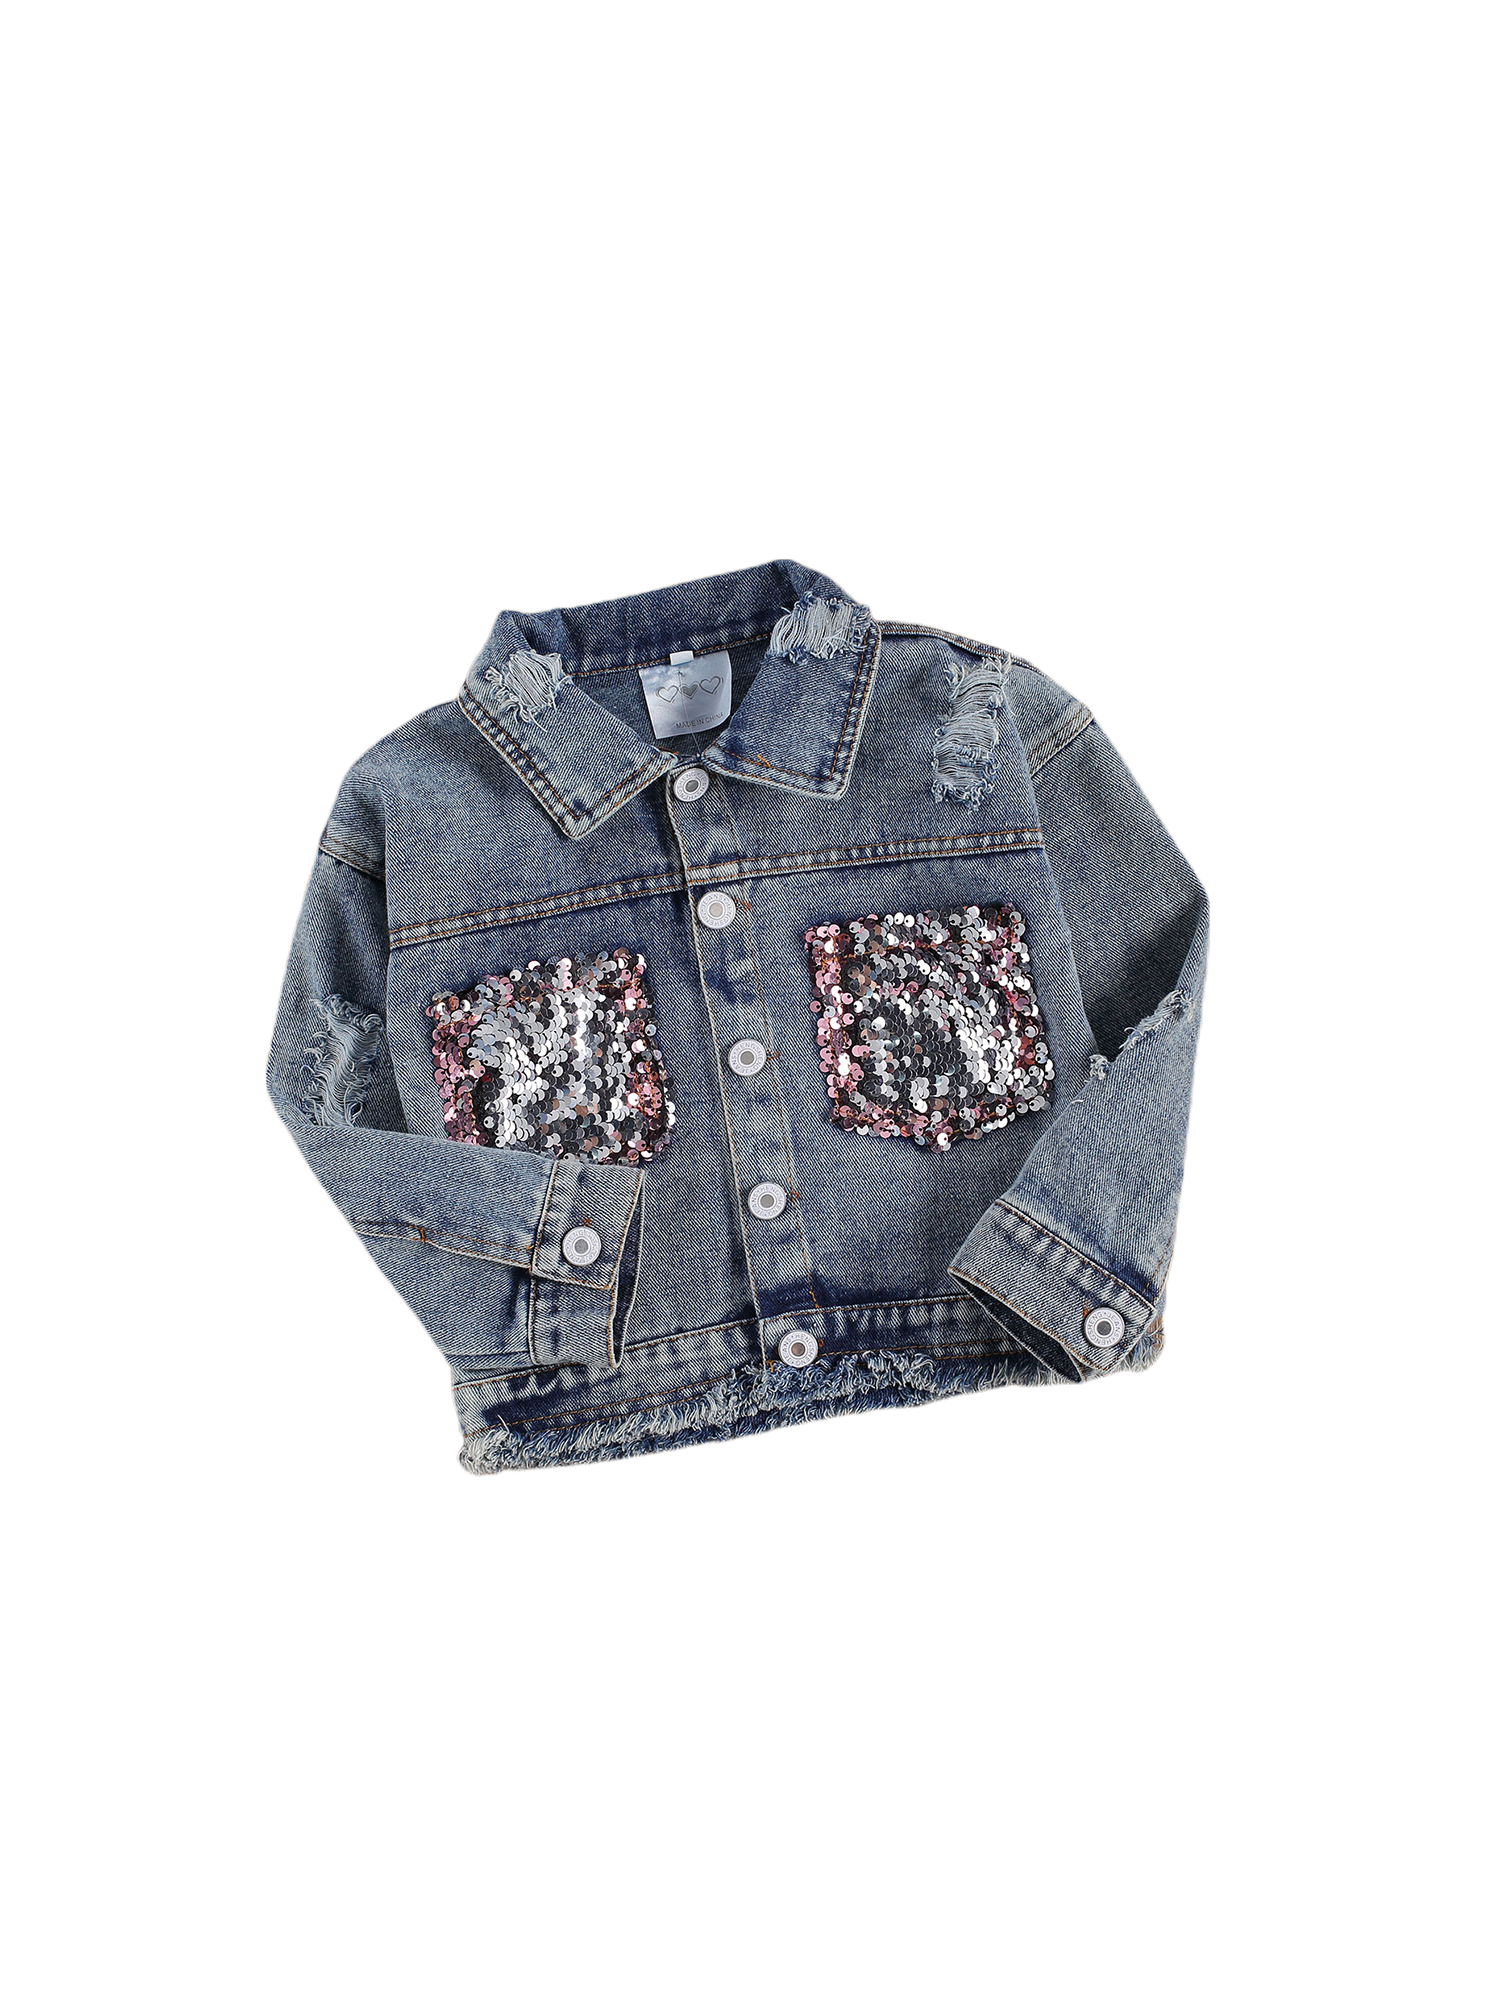 Toddler Baby Girl Coat Long Sleeve Denim Jacket Sequin Pockets Ripped Jean Jacket Outwear 1-6T - image 5 of 10